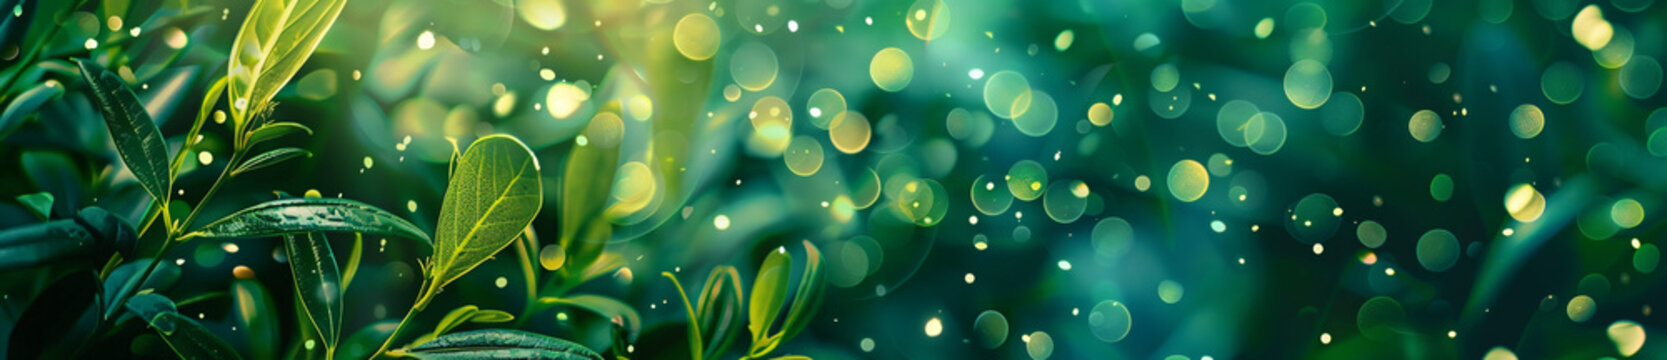 Green leaf with blurred nature background banner, copy space for text and natural landscape greenery wallpaper concept